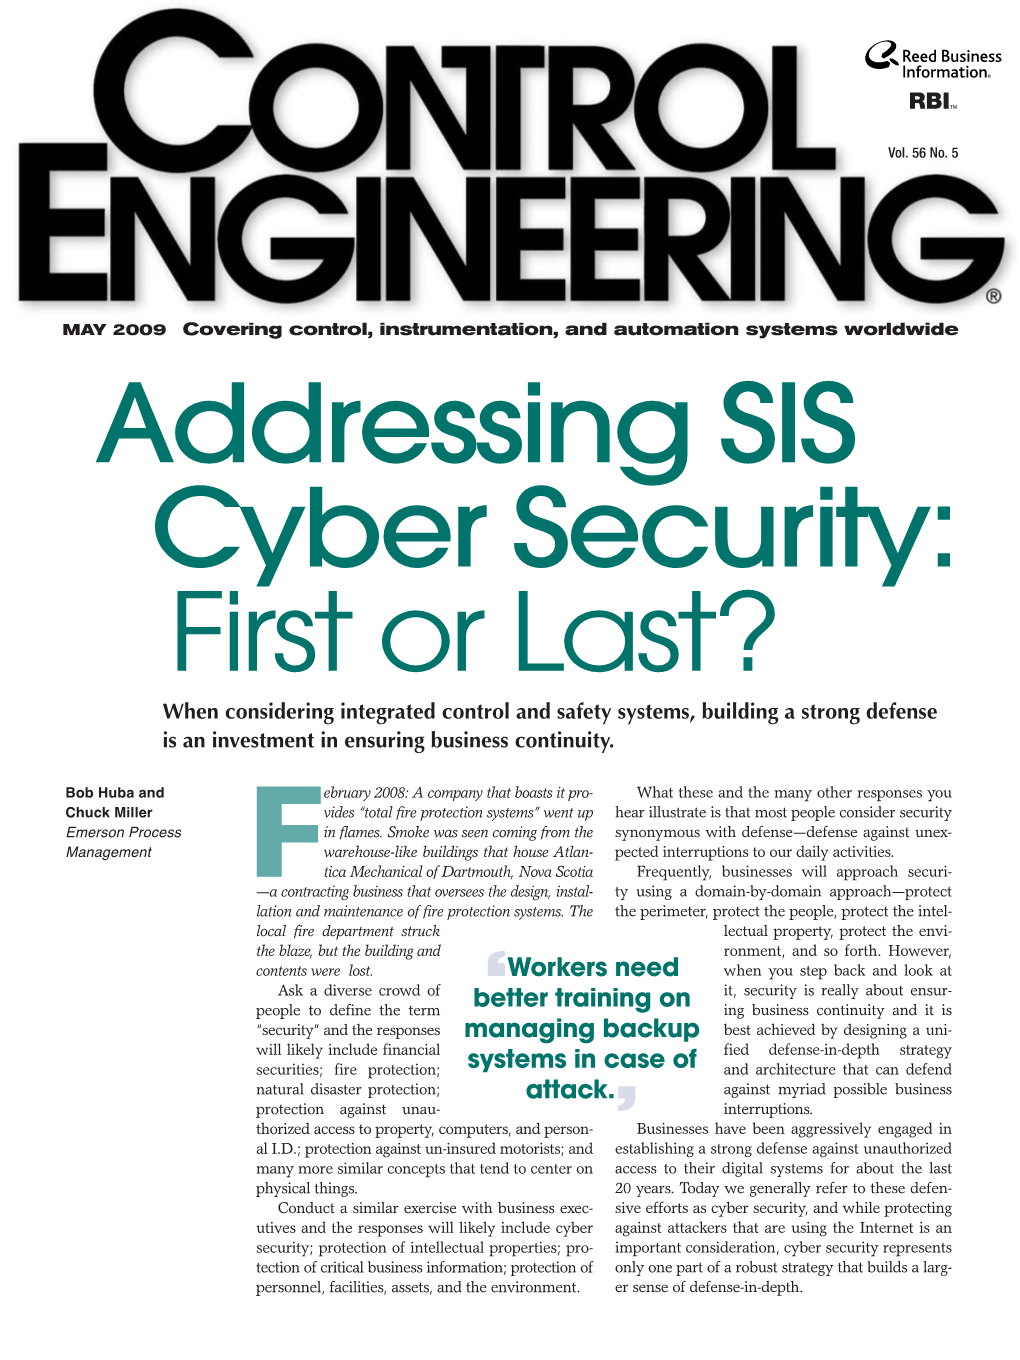 Addressing SIS Cyber Security: First Or Last